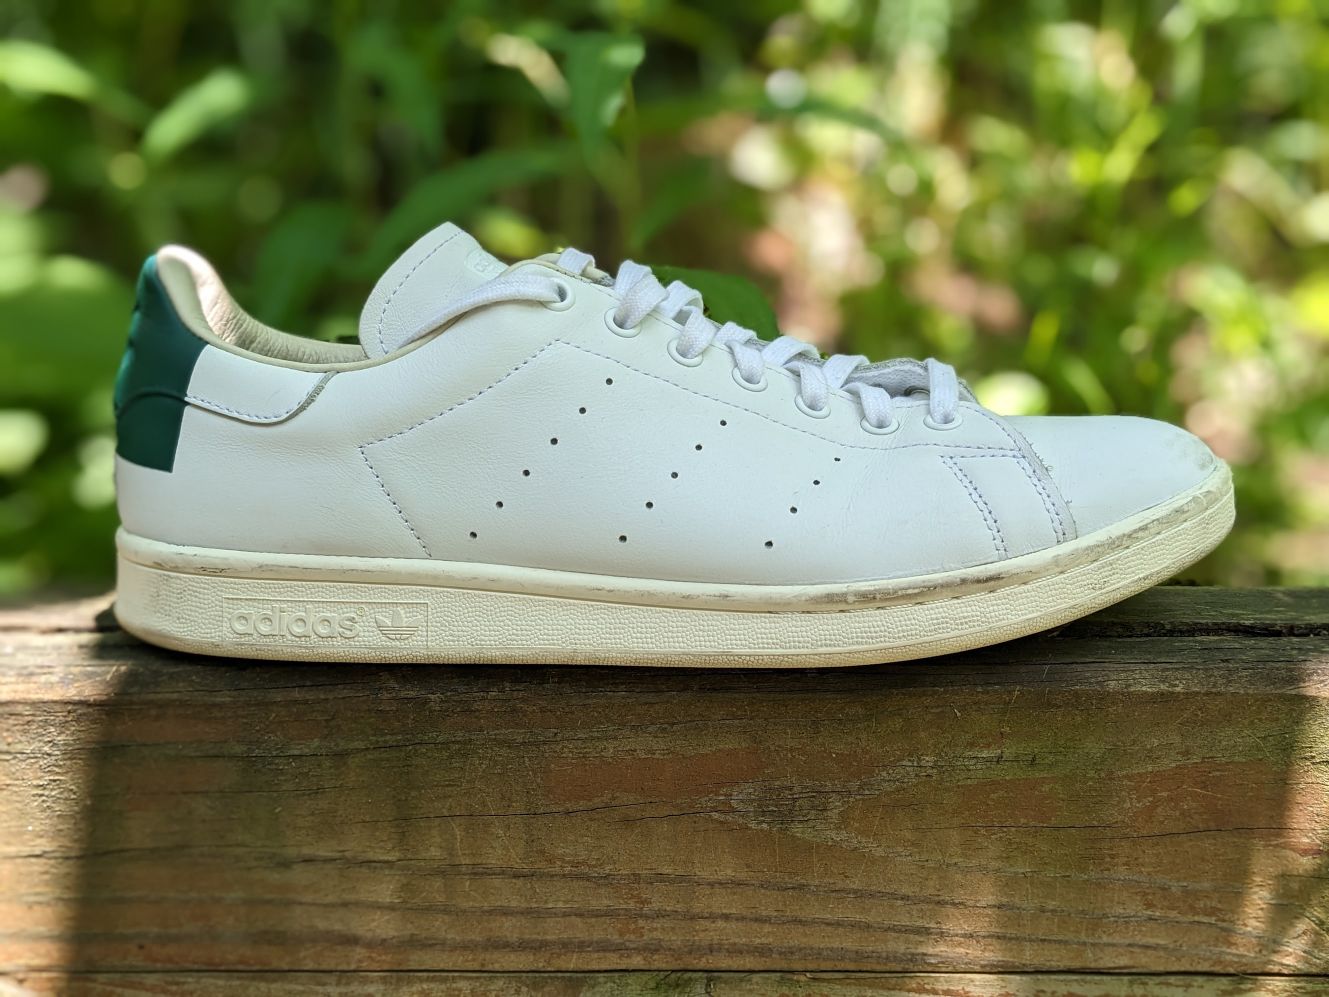 Adidas Stan Smith Recon: 100 Wears on the Daddy